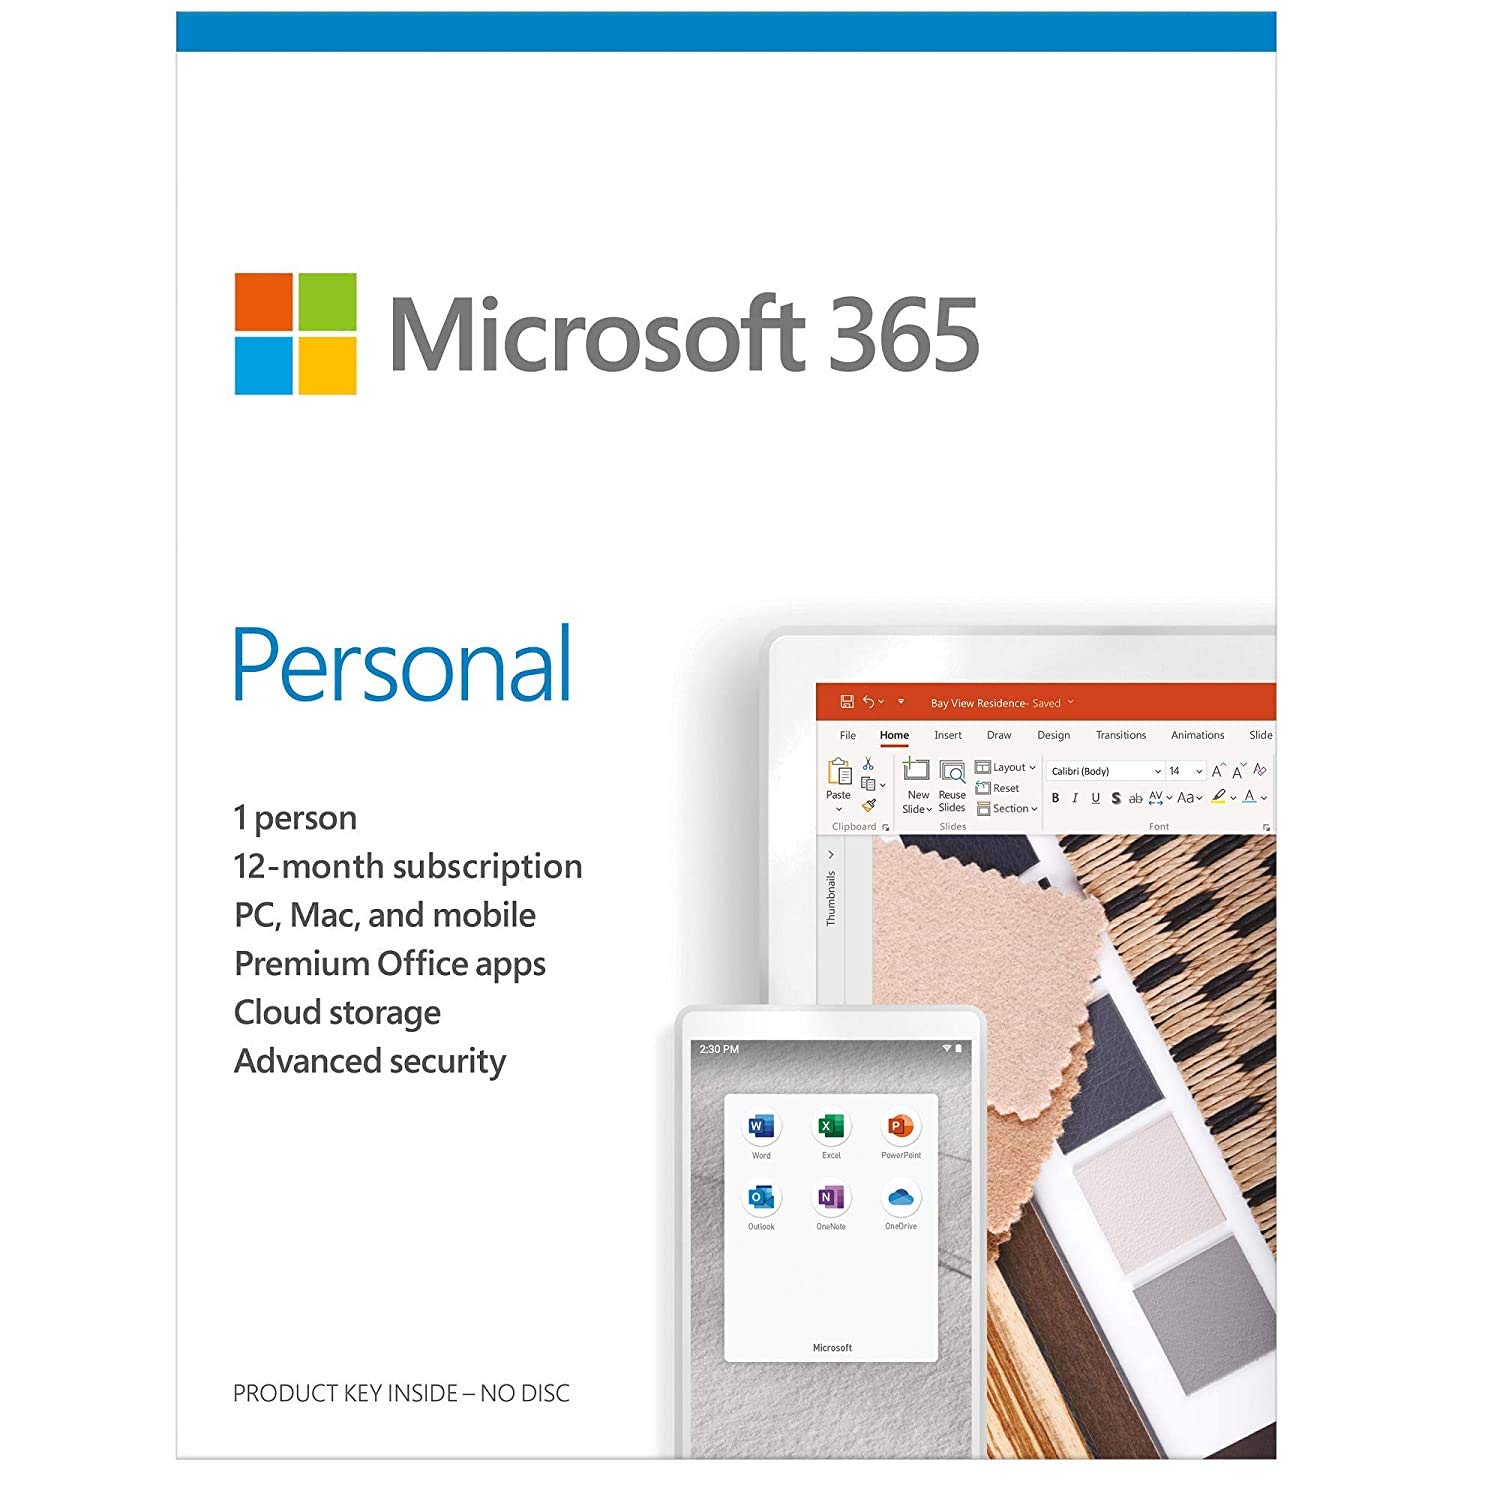 review office 365 for mac